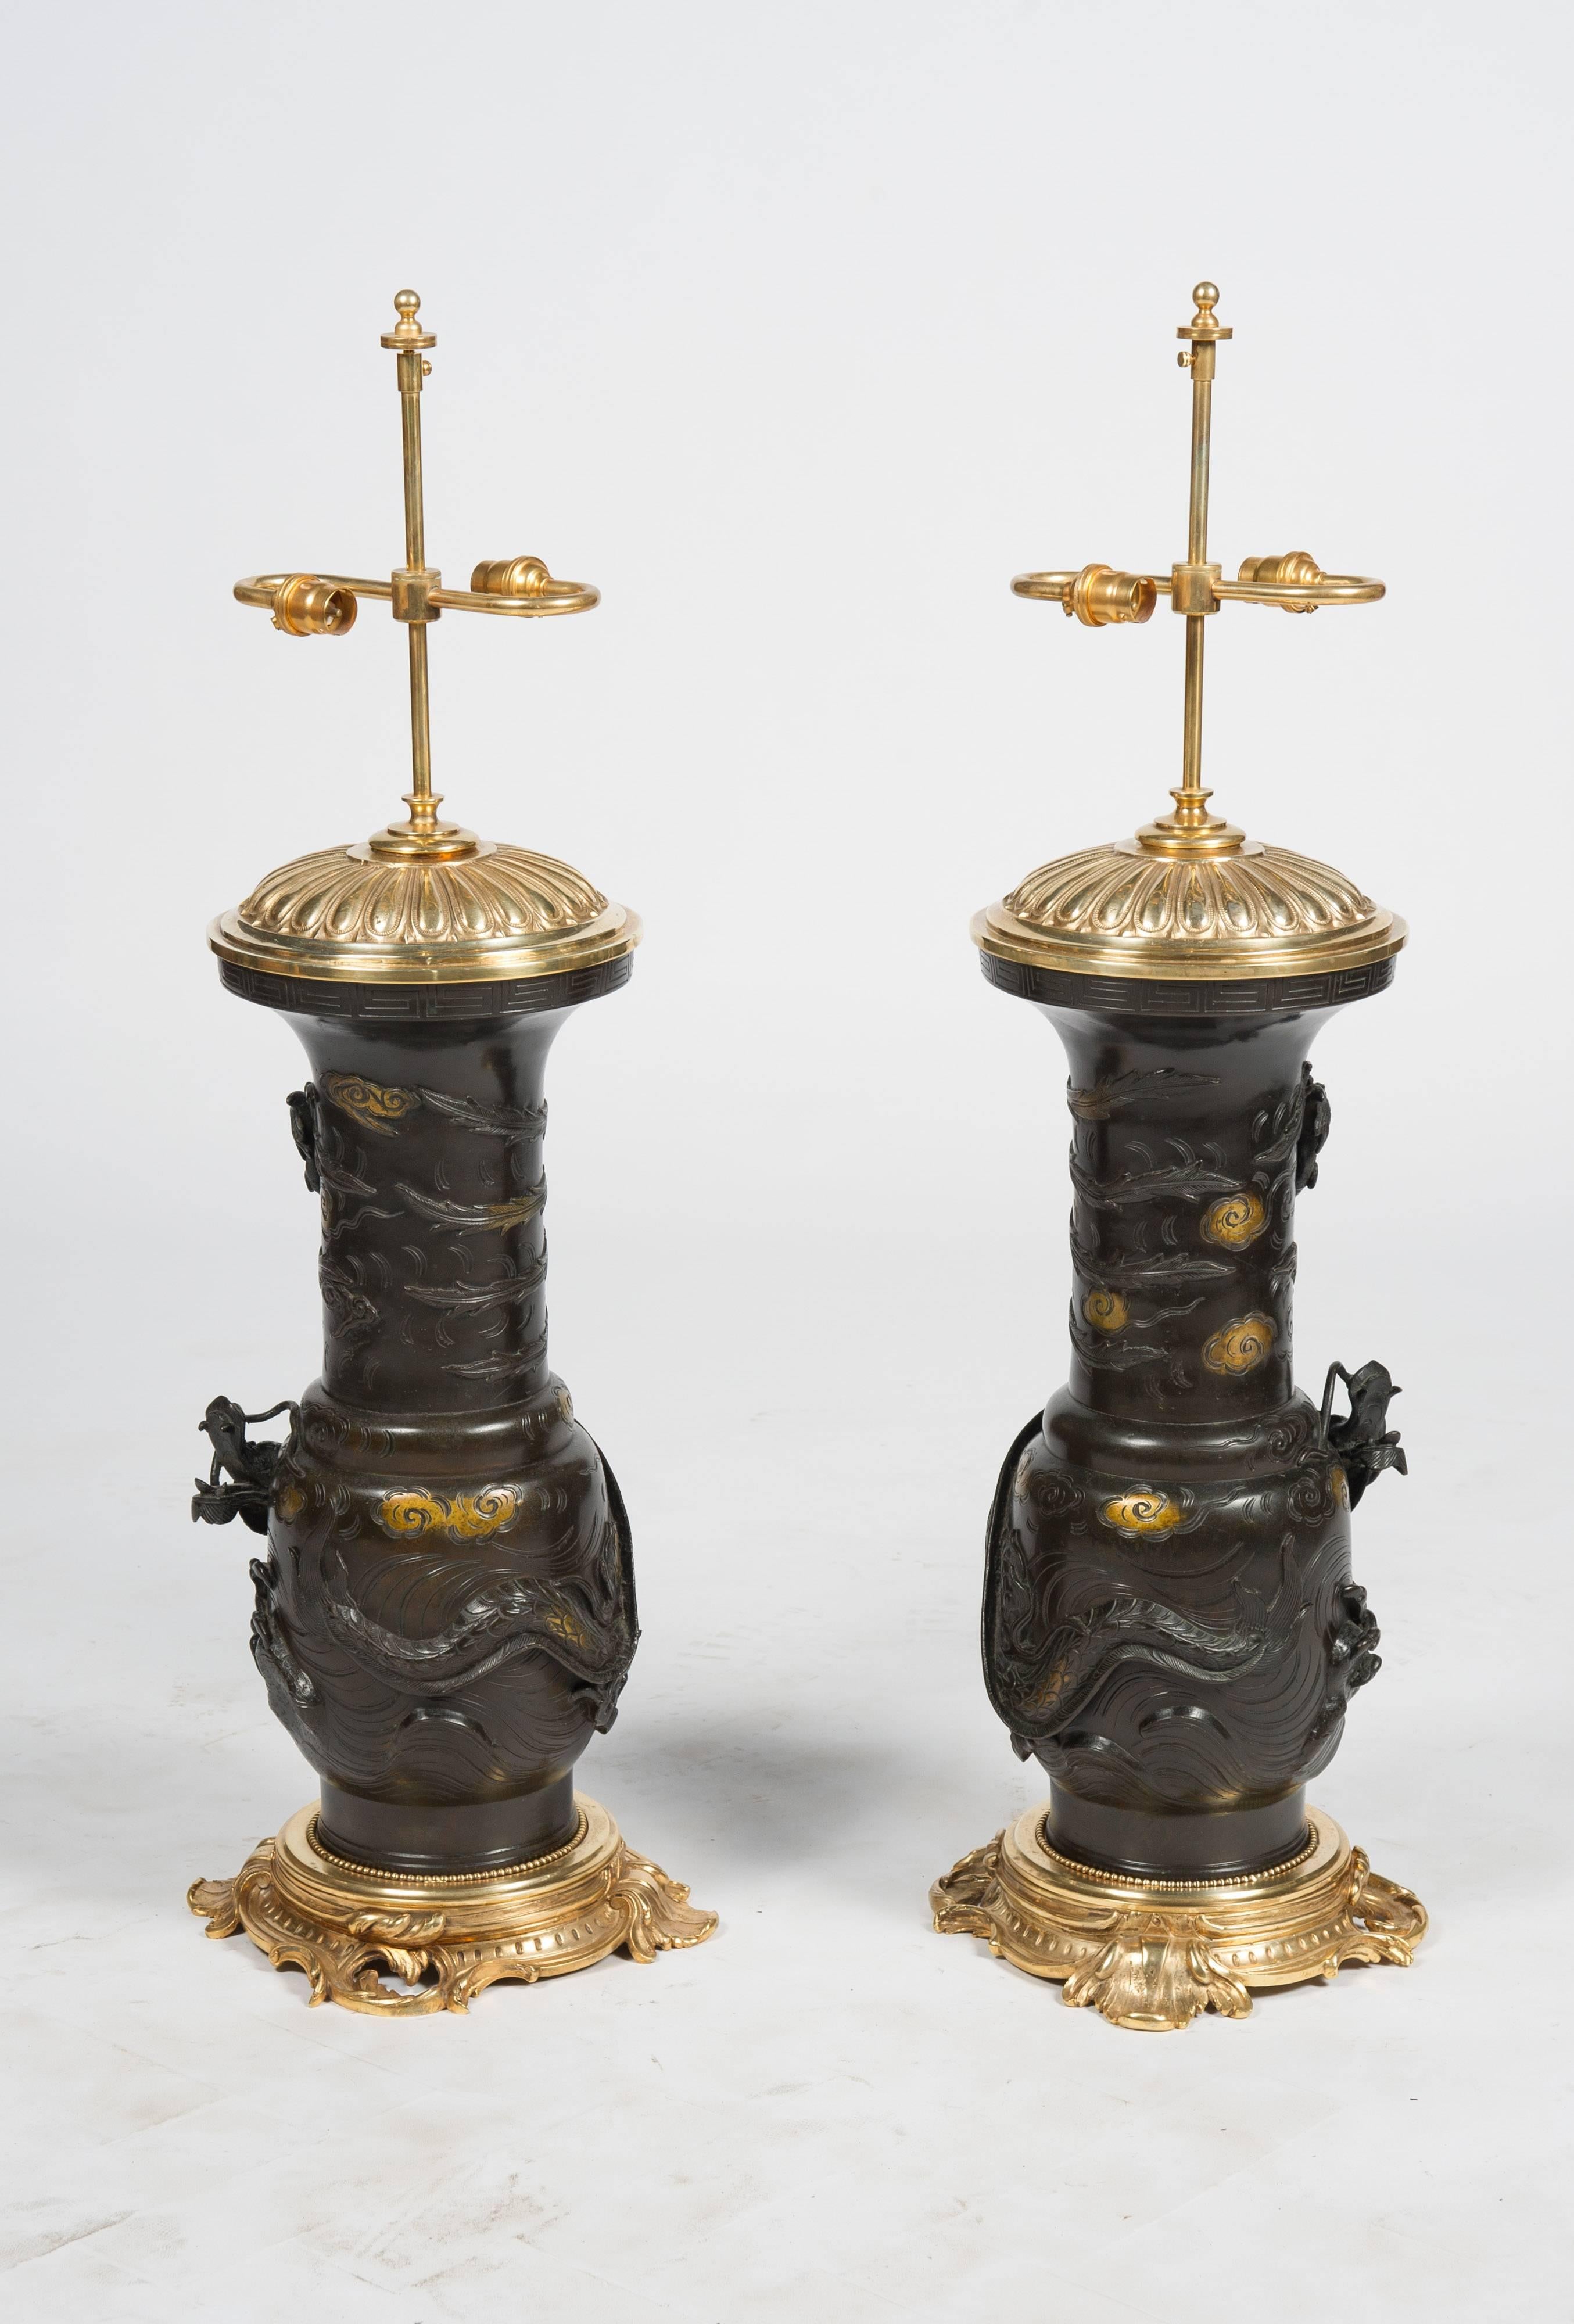 A very impressive pair of 19th century, Japanese, Meiji period (1868-1912) Bronze vases each with mythical dragons wrapped around them, gilded highlights. Mounted in lated gilded ormolu Rococo style bases and tops.